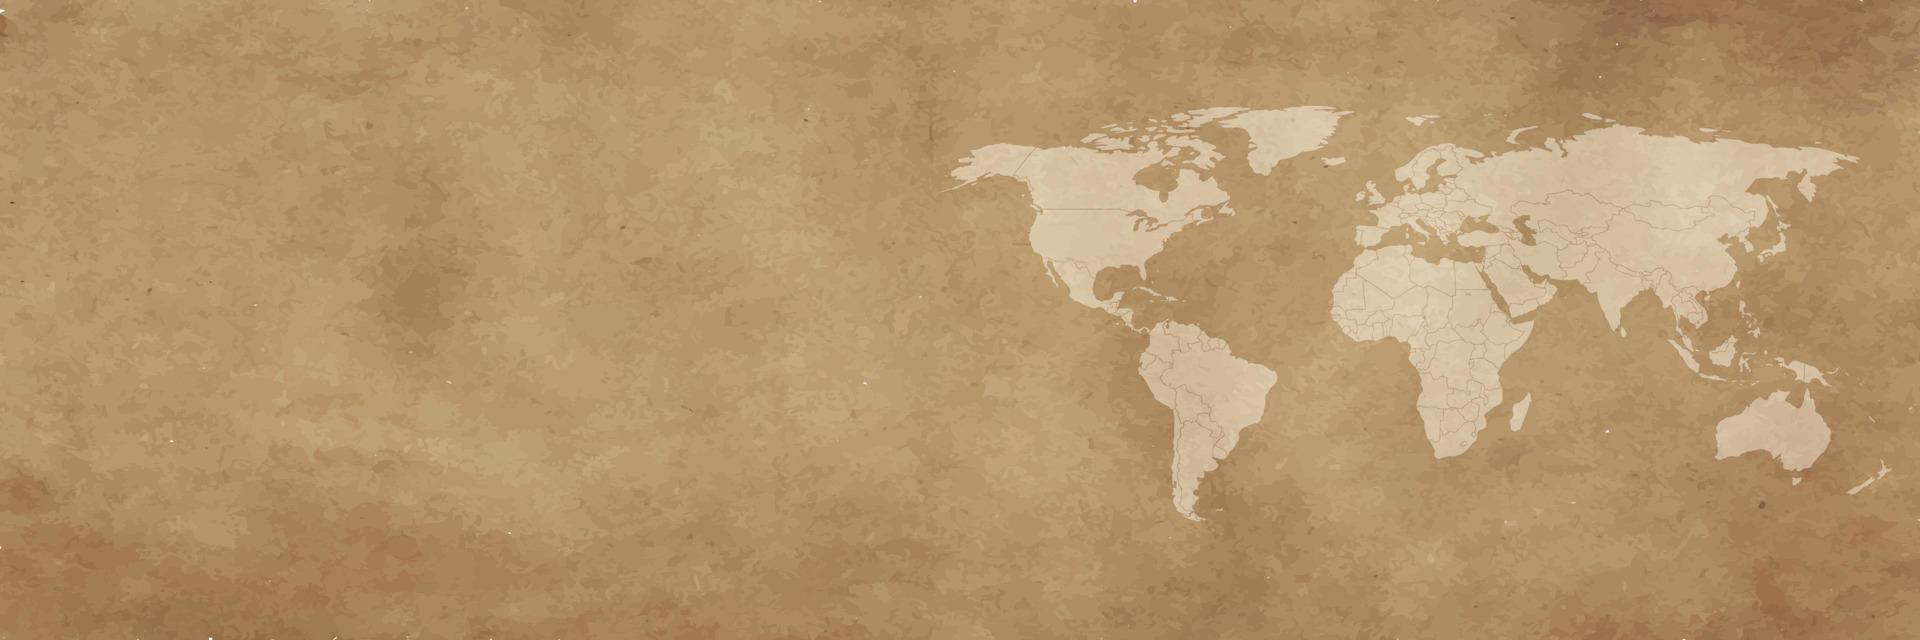 World map on brown background banner vector